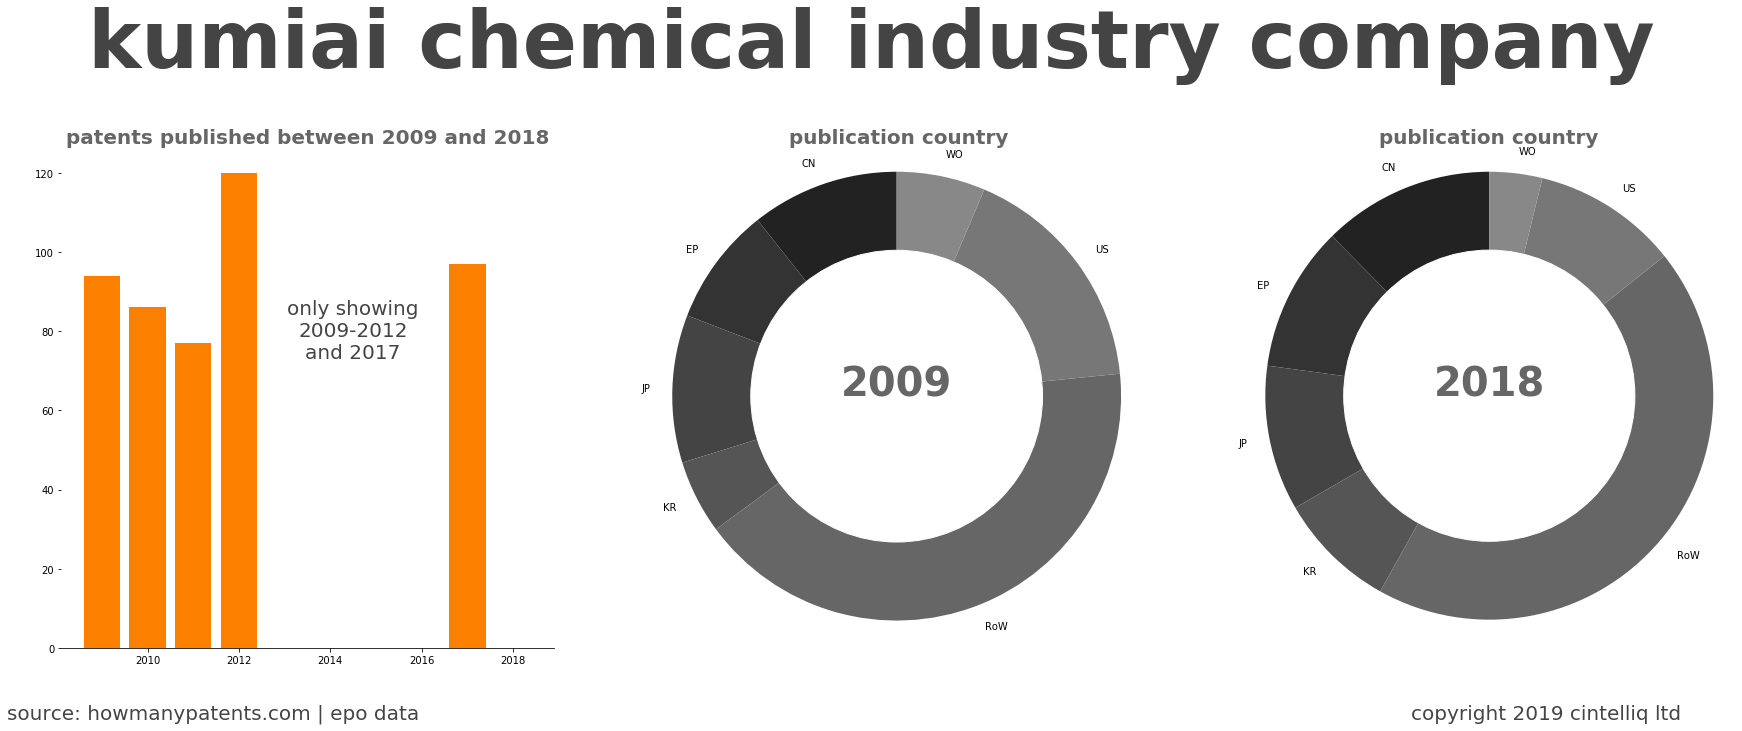 summary of patents for Kumiai Chemical Industry Company